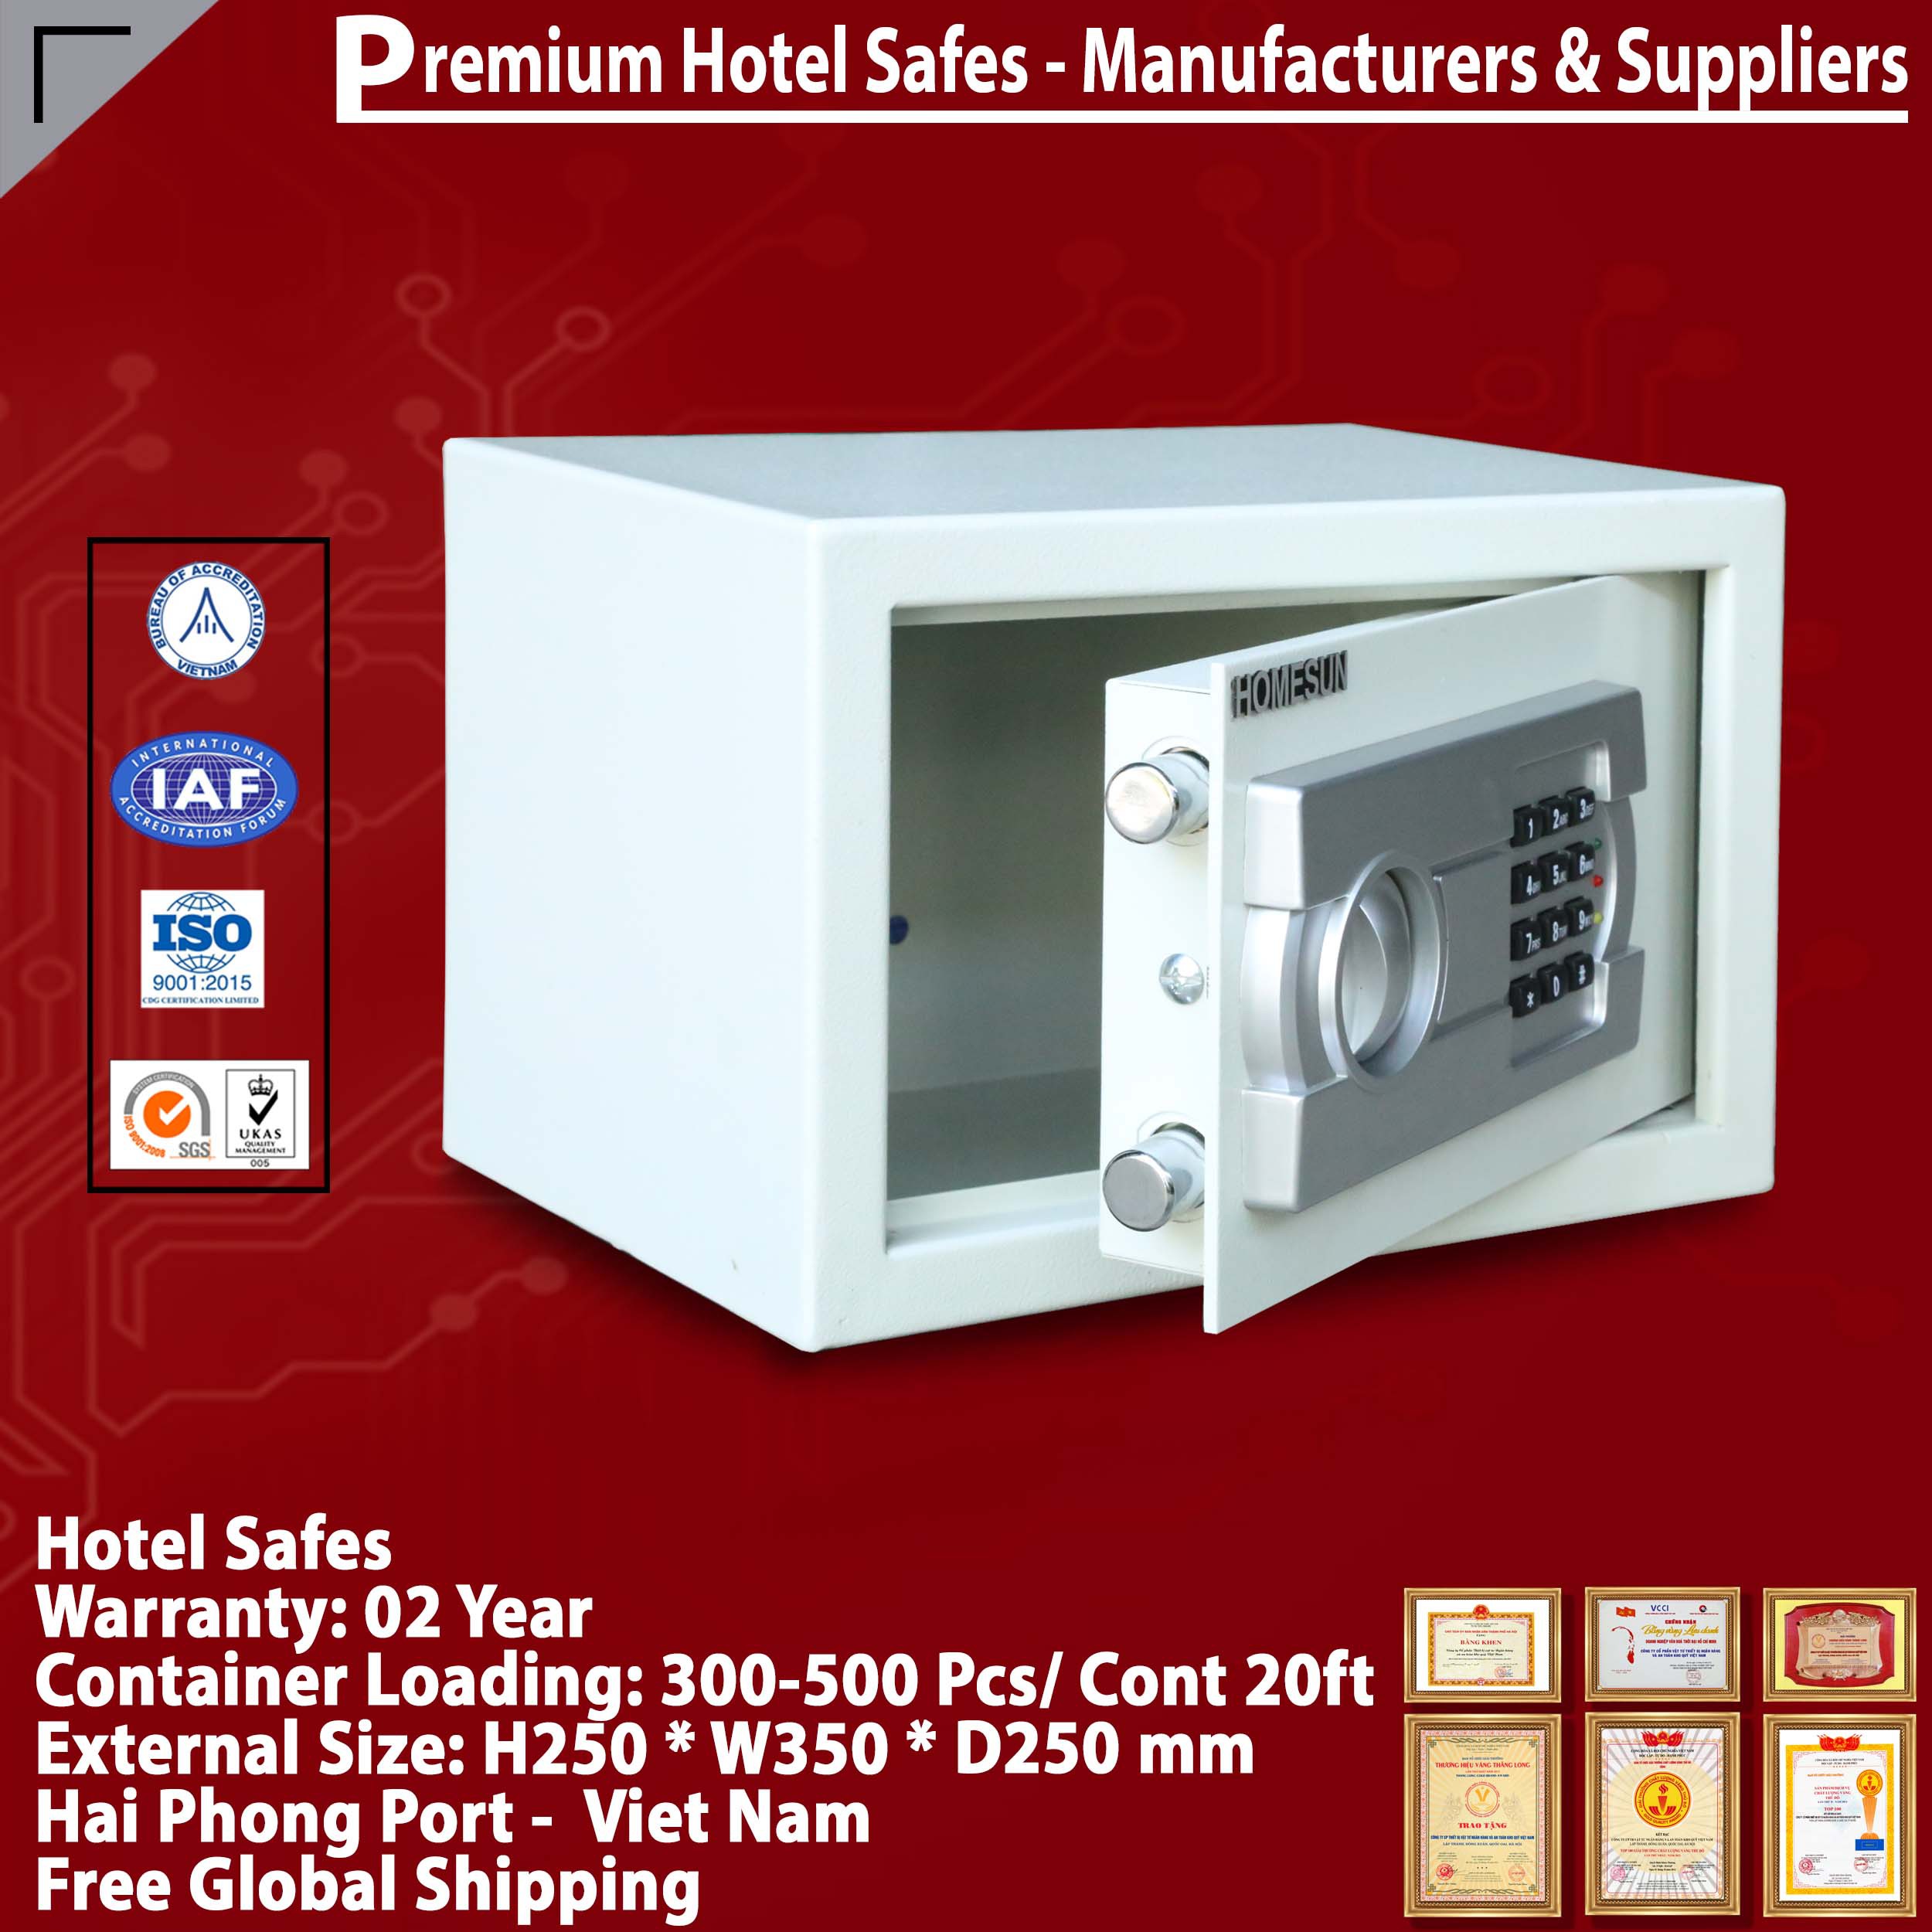 Best Fireproof Best Sellers In Hotel Safes High Quality Price Ratio‎